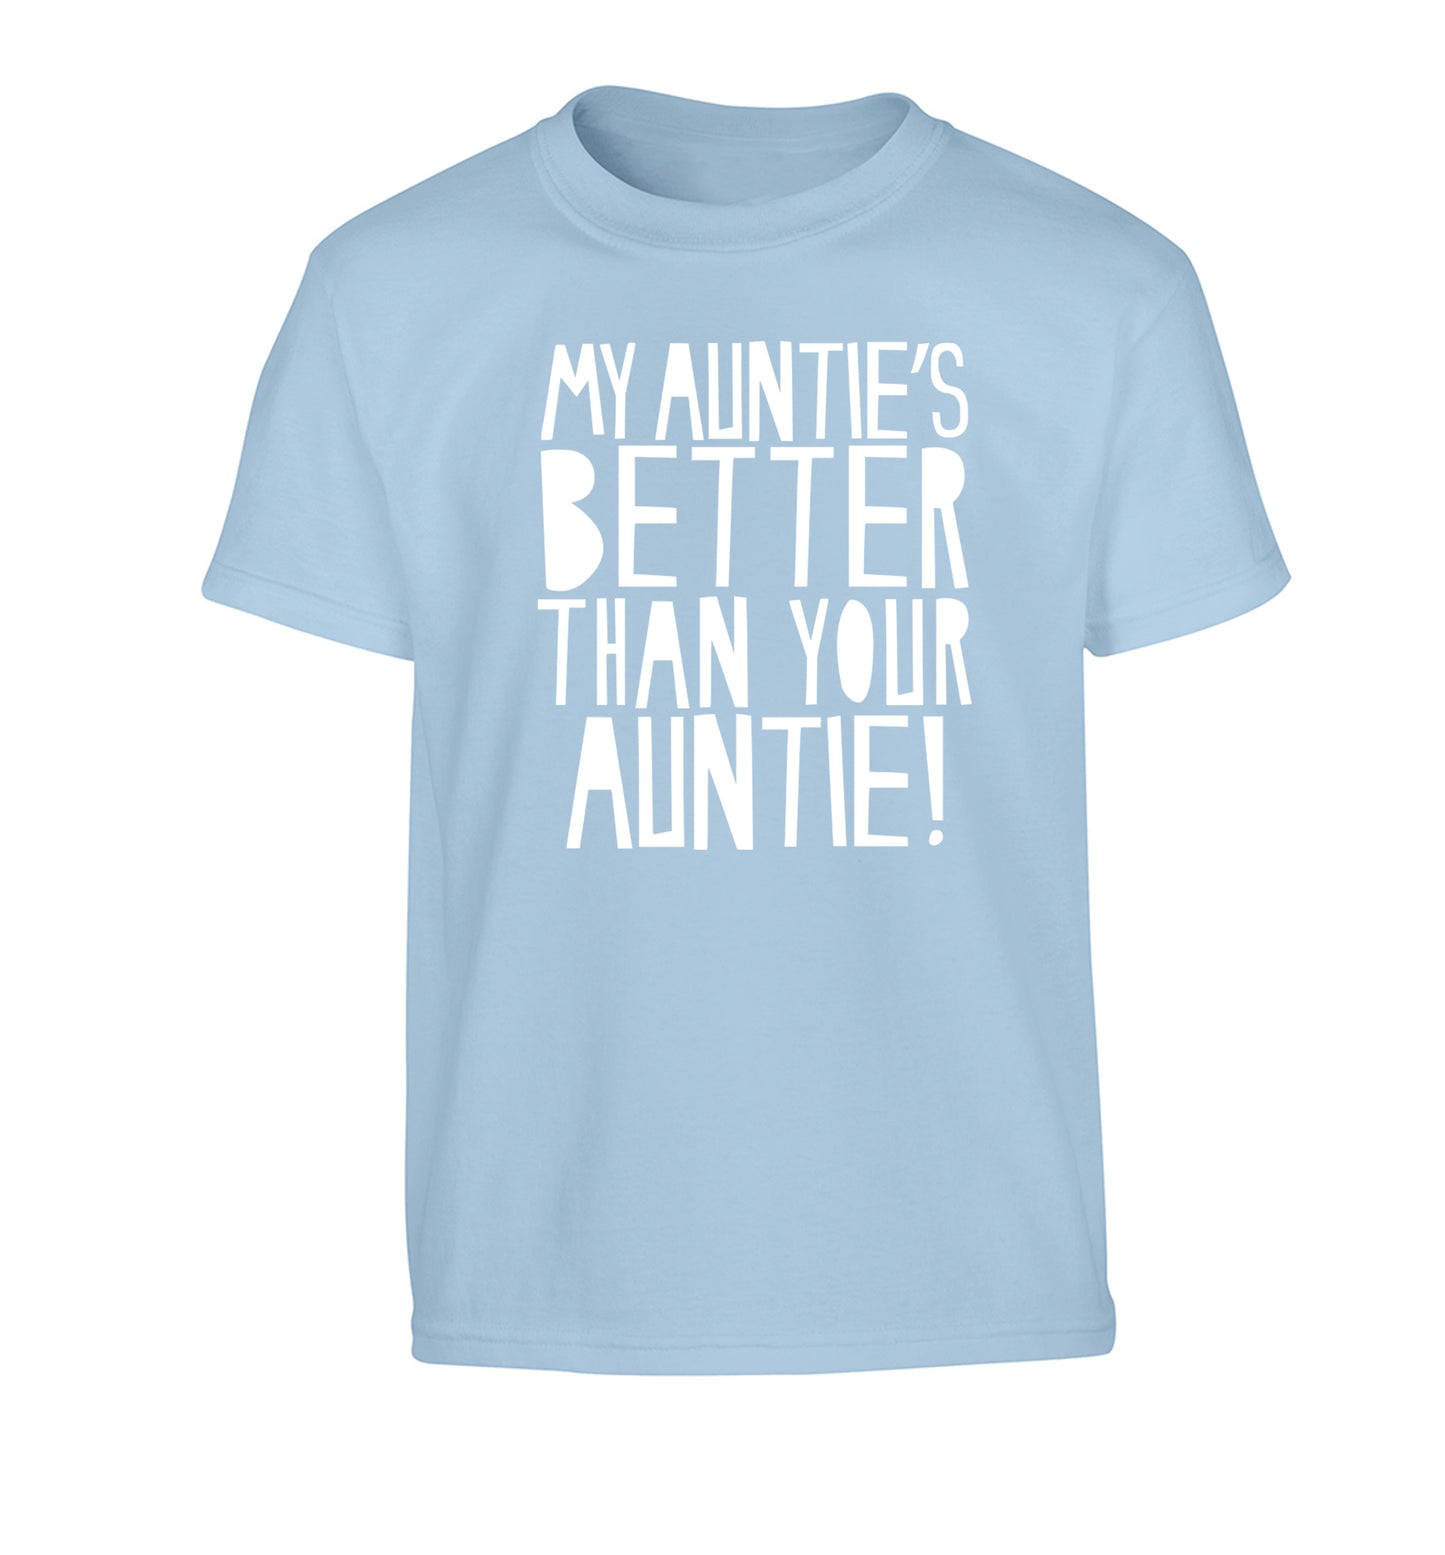 My auntie's better than your auntie Children's light blue Tshirt 12-13 Years